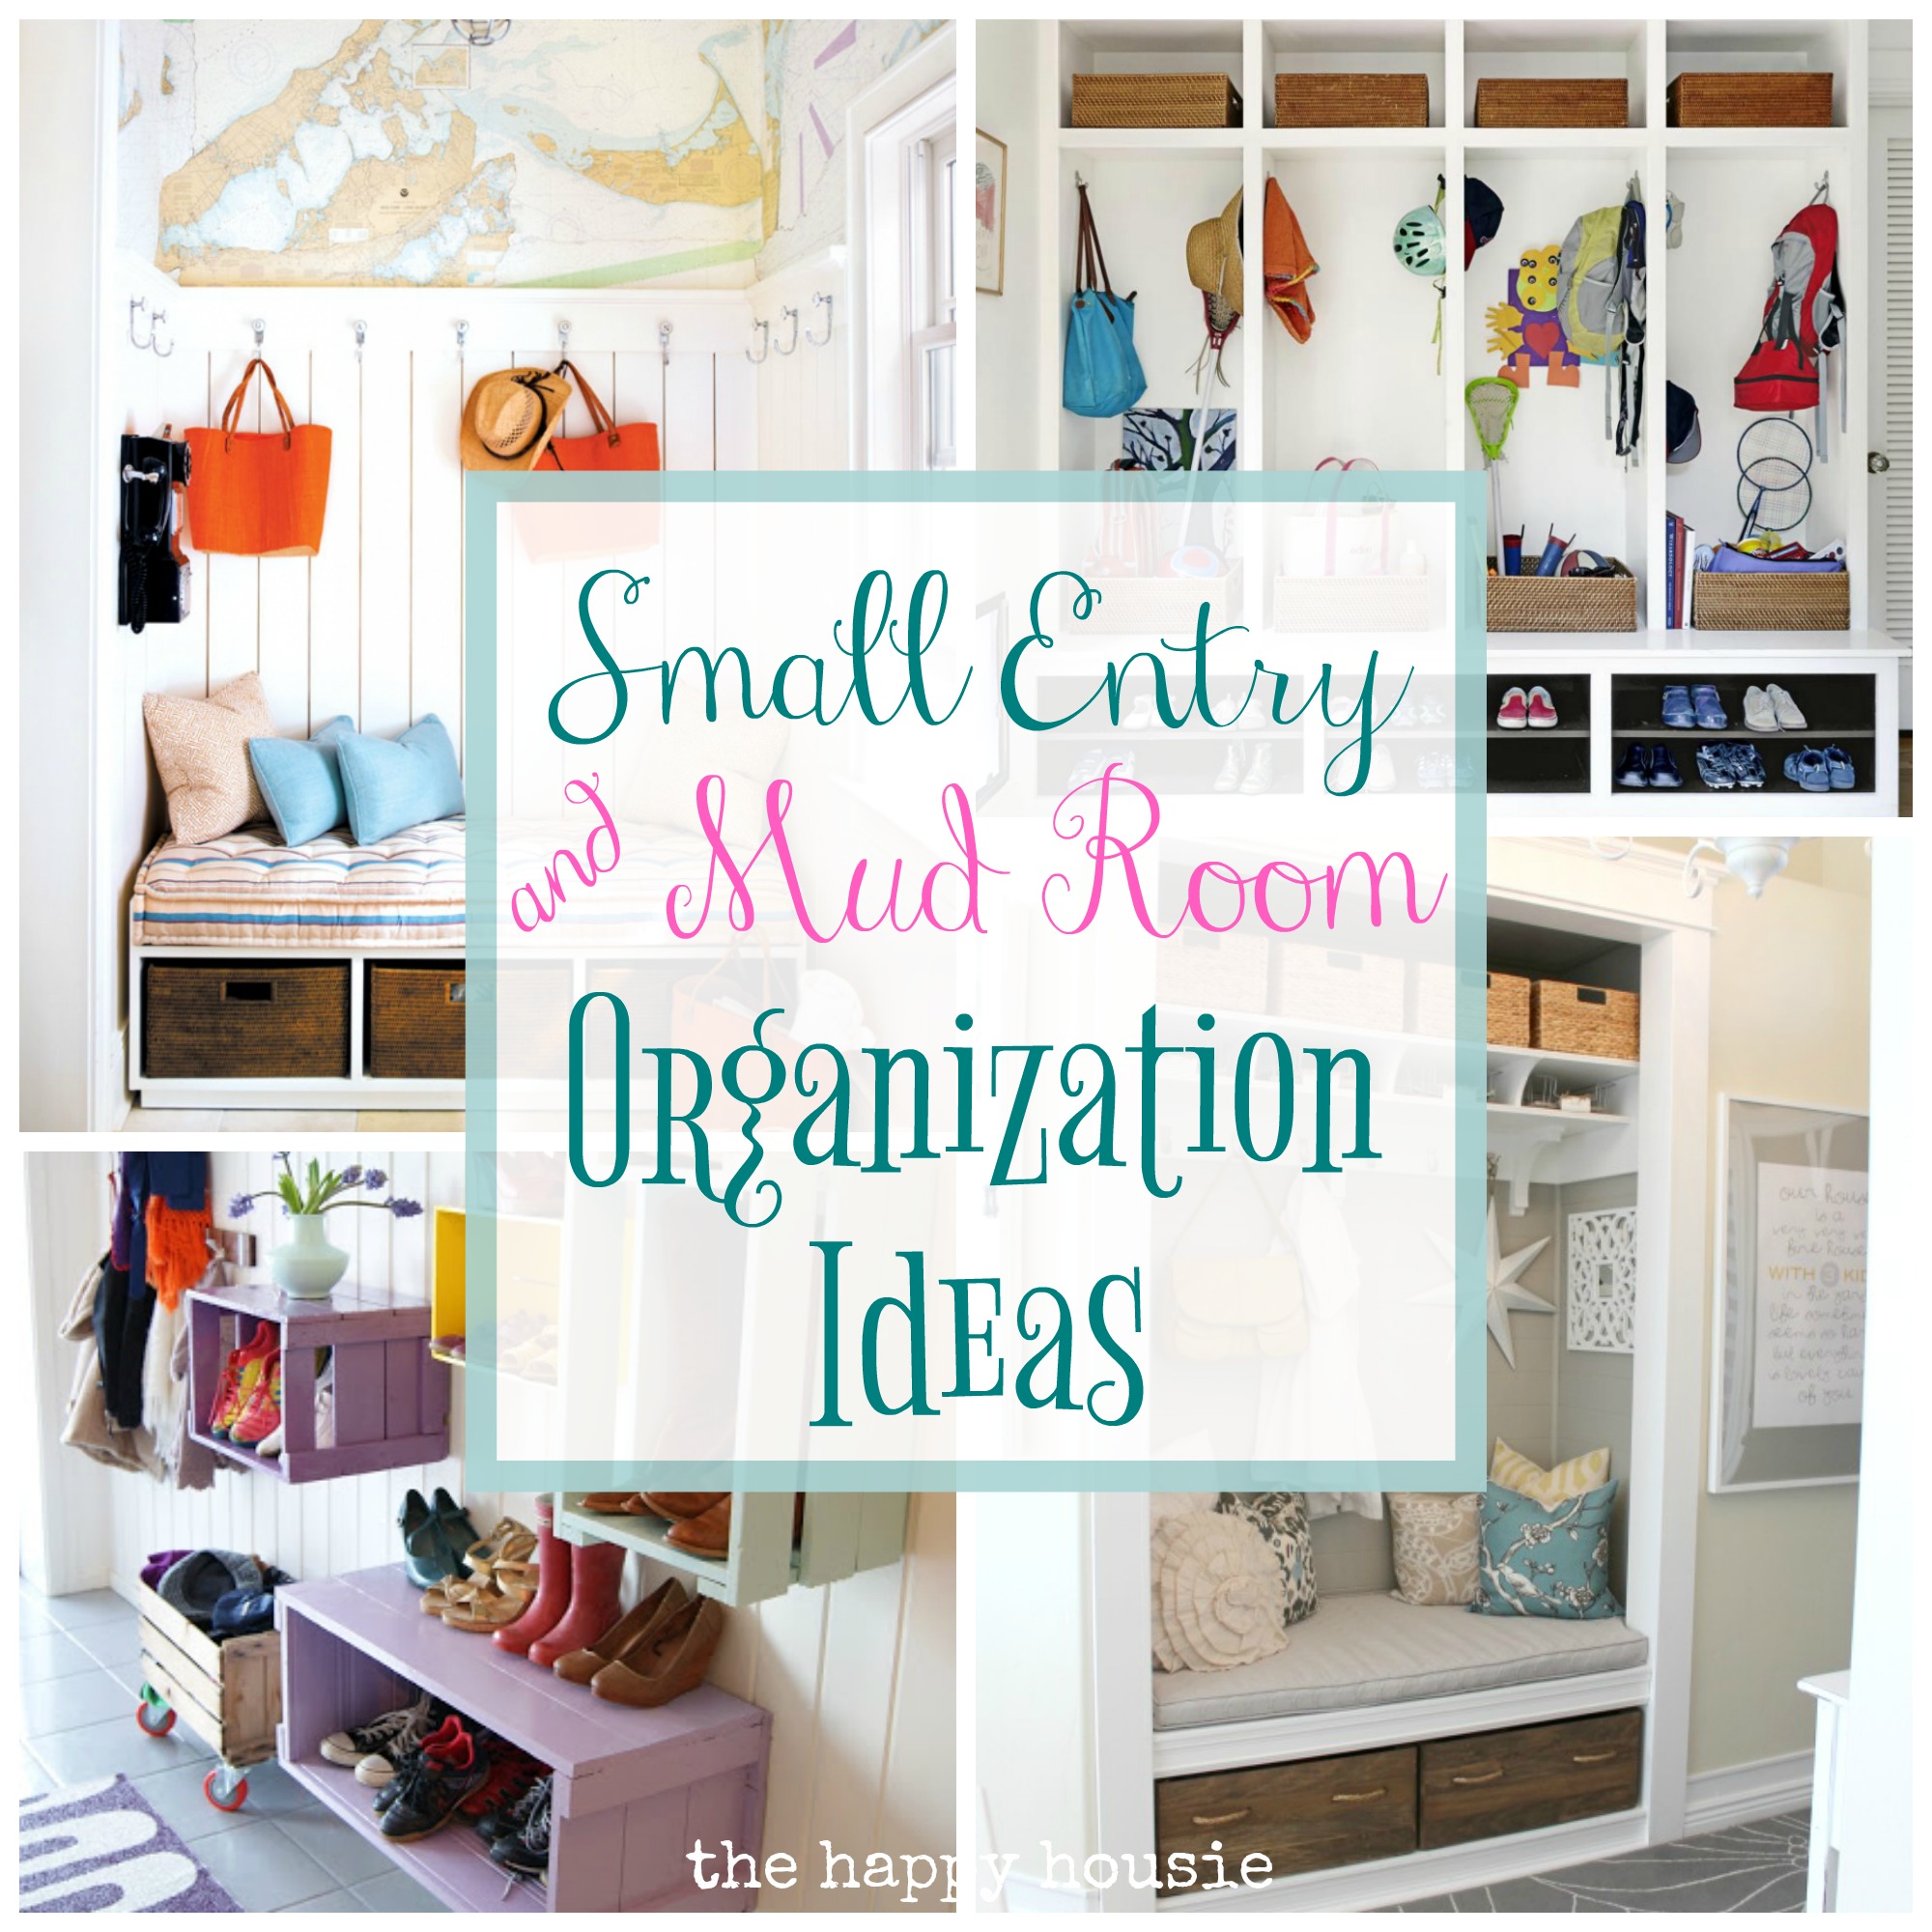 Small entry and mud room organization ideas.